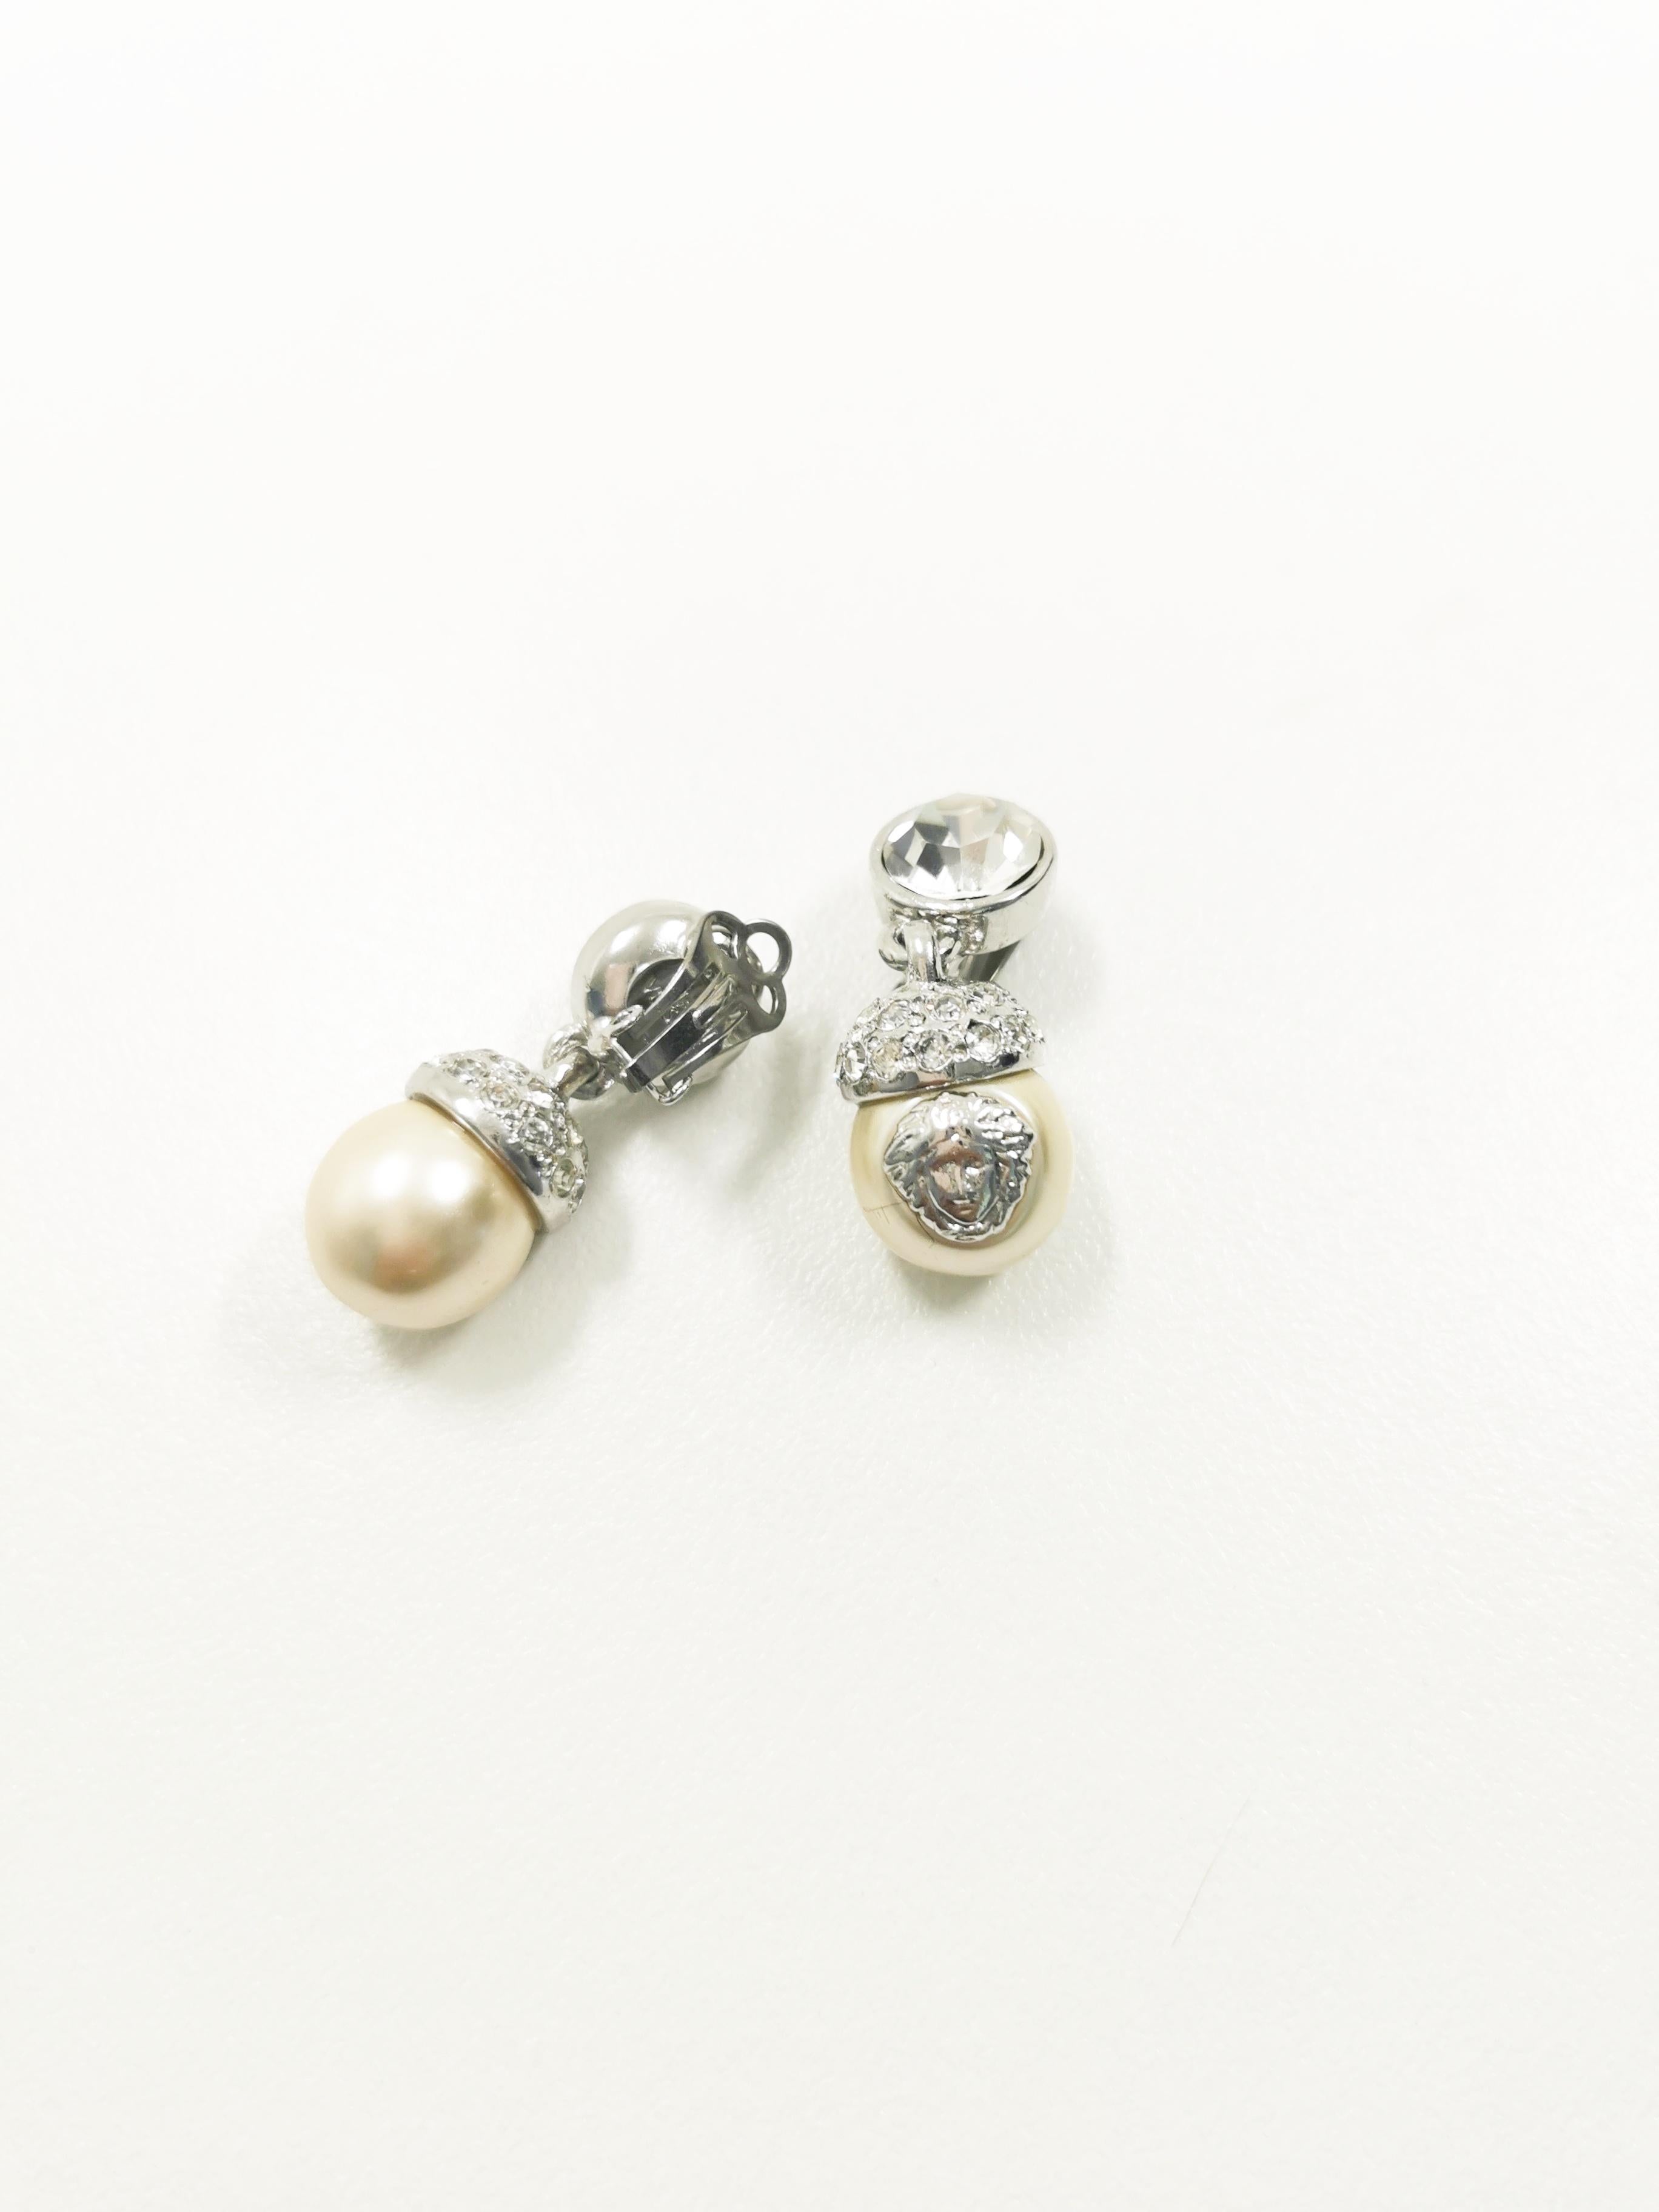 Introducing a timeless piece of luxury fashion history: the 1990's Gianni Versace Medusa Rhinestones Drop Pearl Silver Clip-On Earrings. These exquisite earrings encapsulate the opulence and glamour synonymous with the iconic Italian designer's